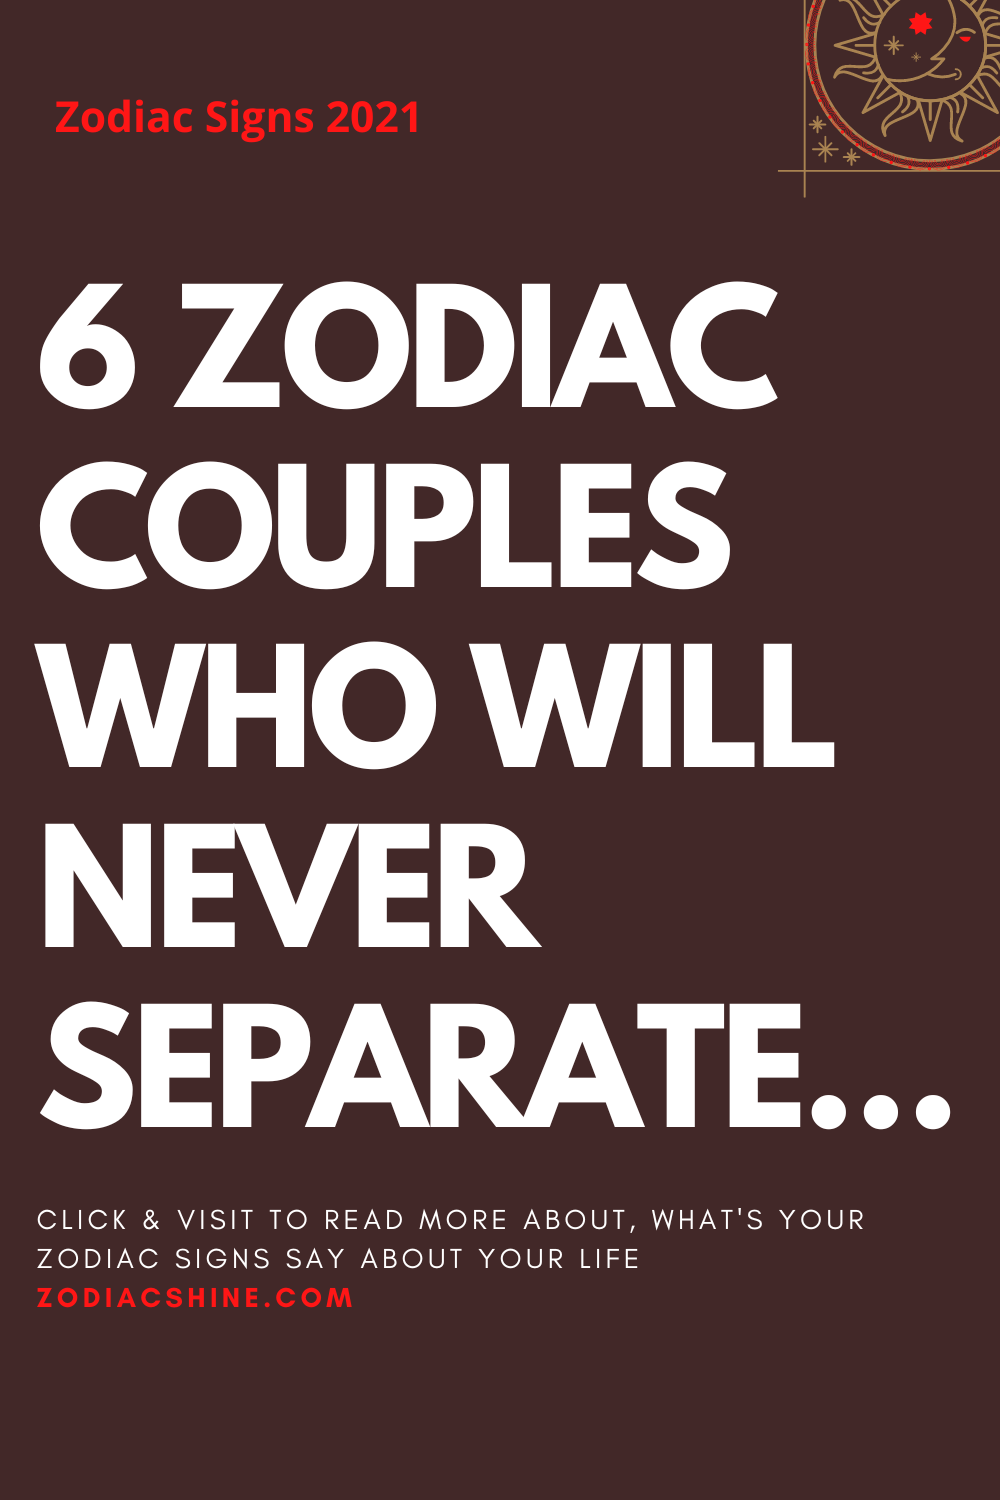 6 ZODIAC COUPLES WHO WILL NEVER SEPARATE…